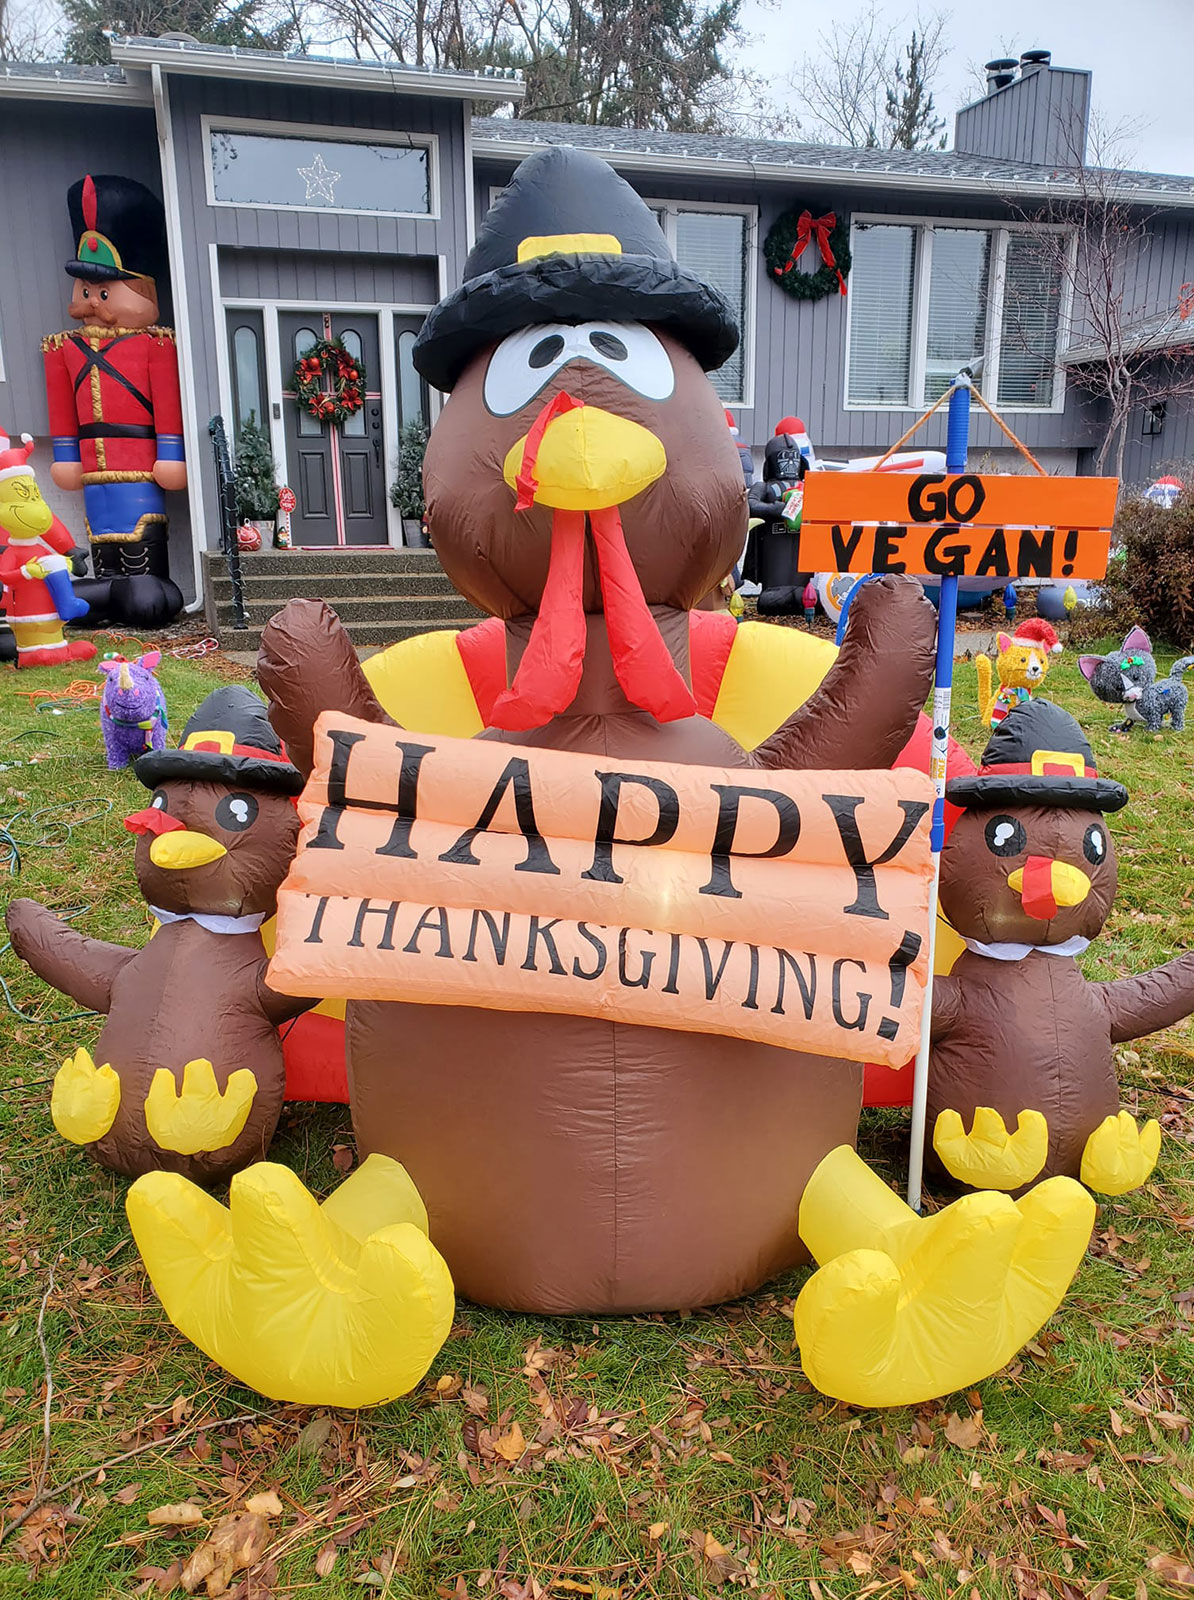 Inflatable turkey with chicks on lawn holding Happy Thanksgiving plus Go Vegan sign